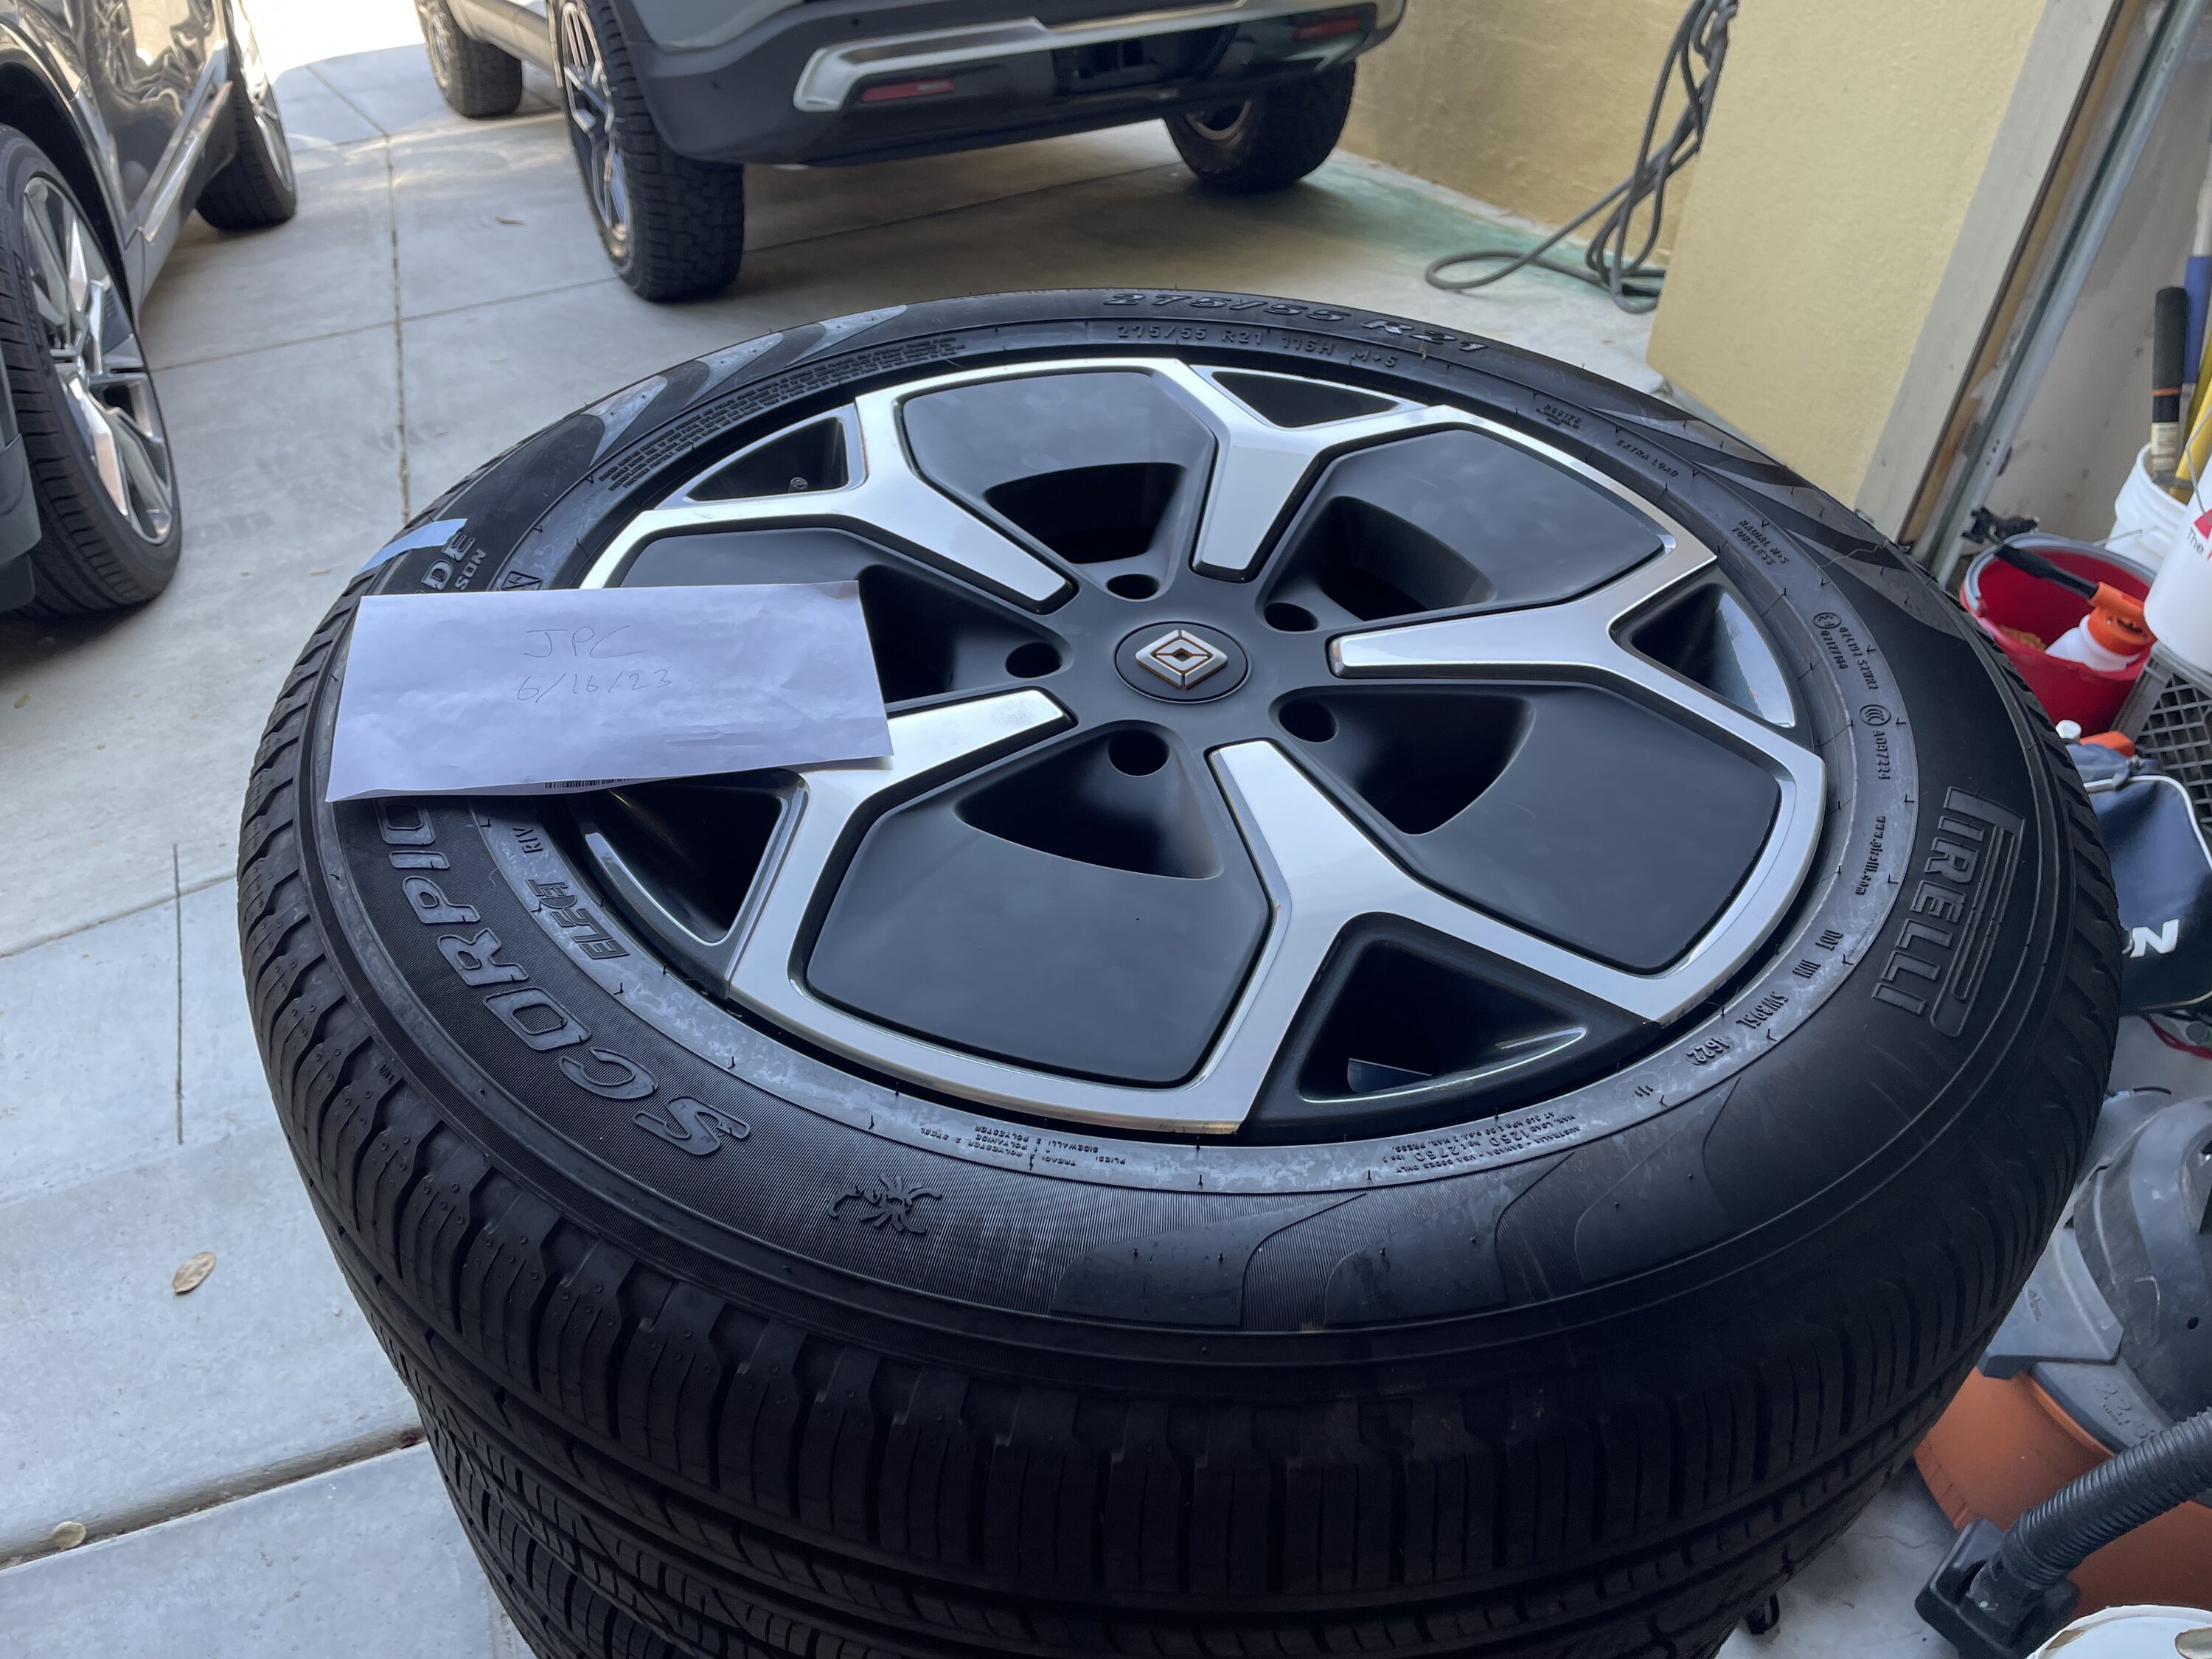 Rivian R1T R1S WTS: 21” wheel and tire set - Bay Area - 1,900 miles - $2,000 IMG_9106